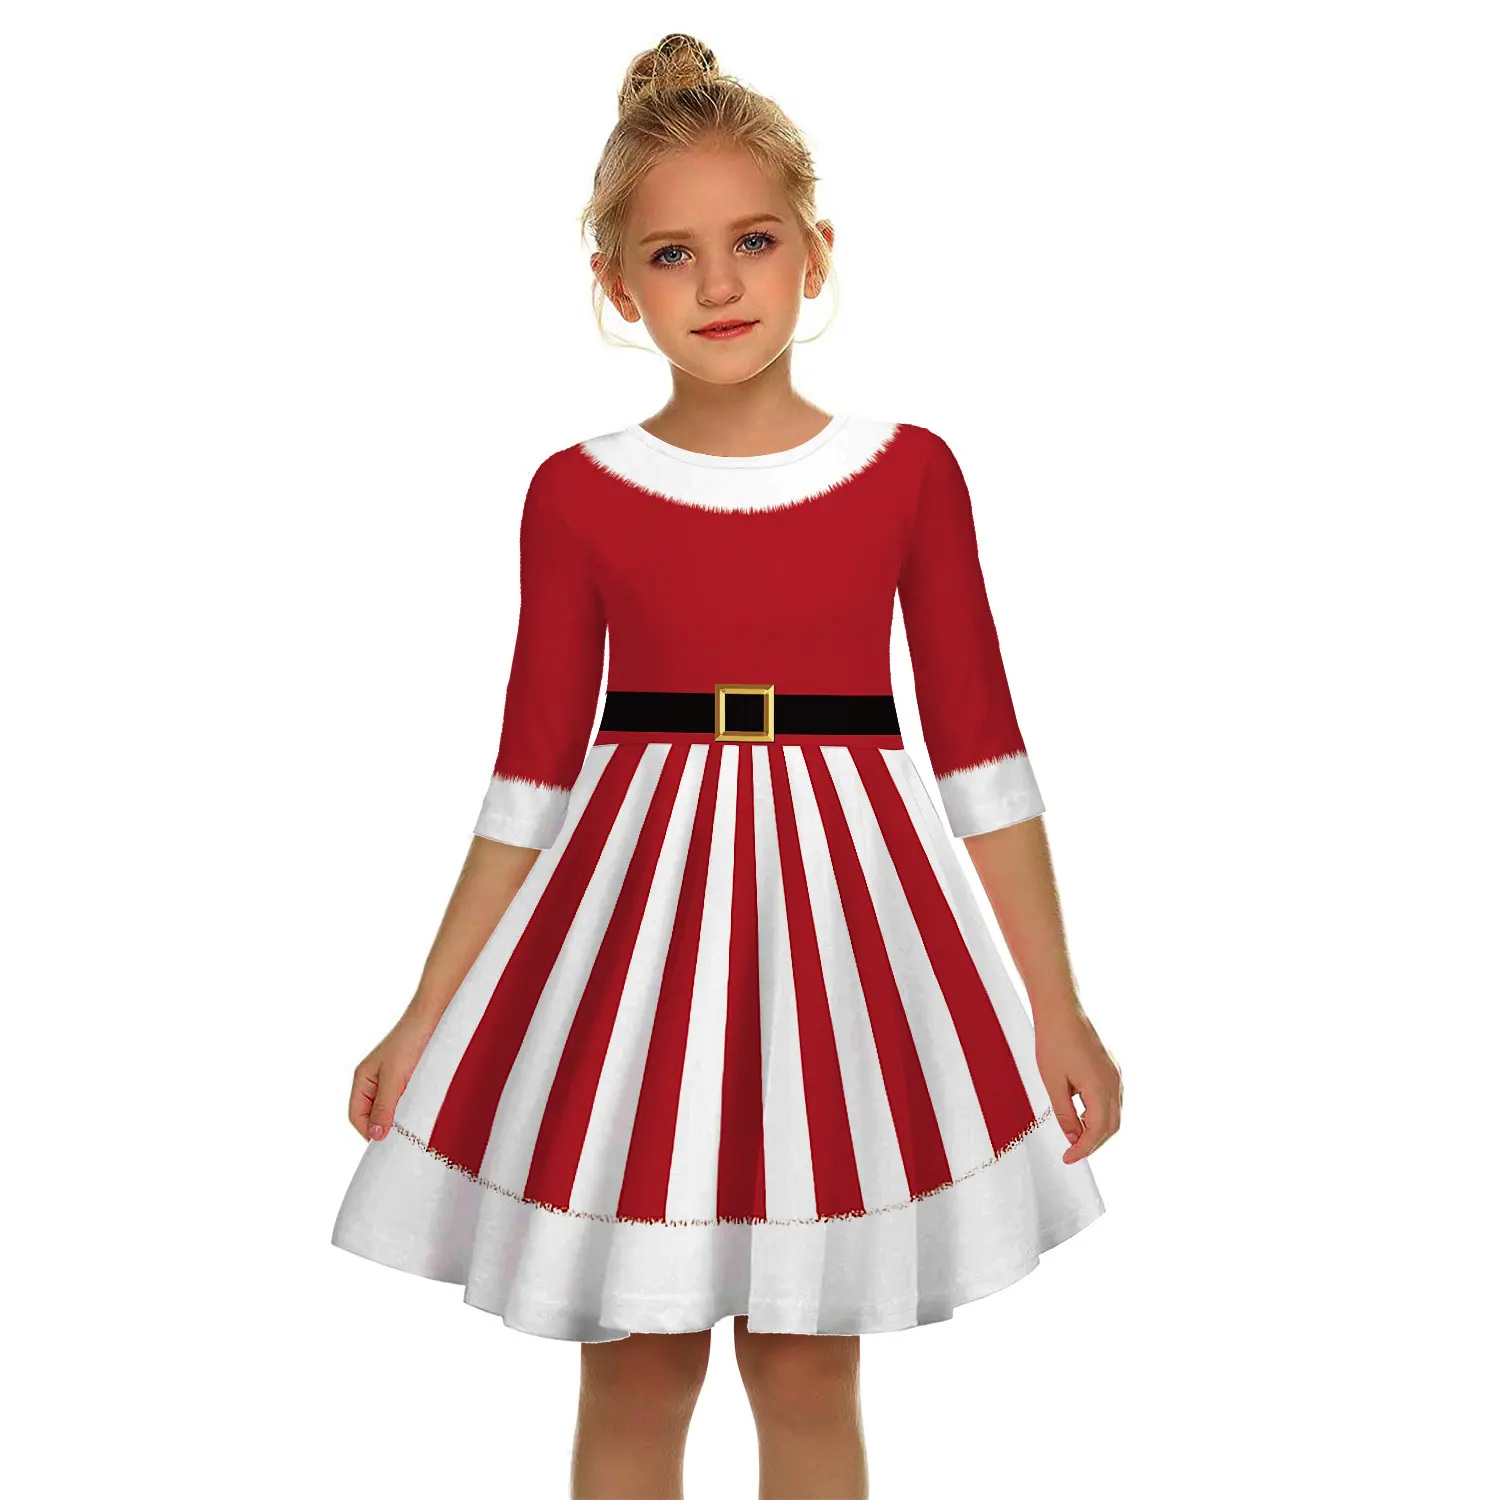 Fancy Performance Wear Lovely A-Line Swing Half Sleeve Girls Summer Party Dress For Kids Christmas Clothes